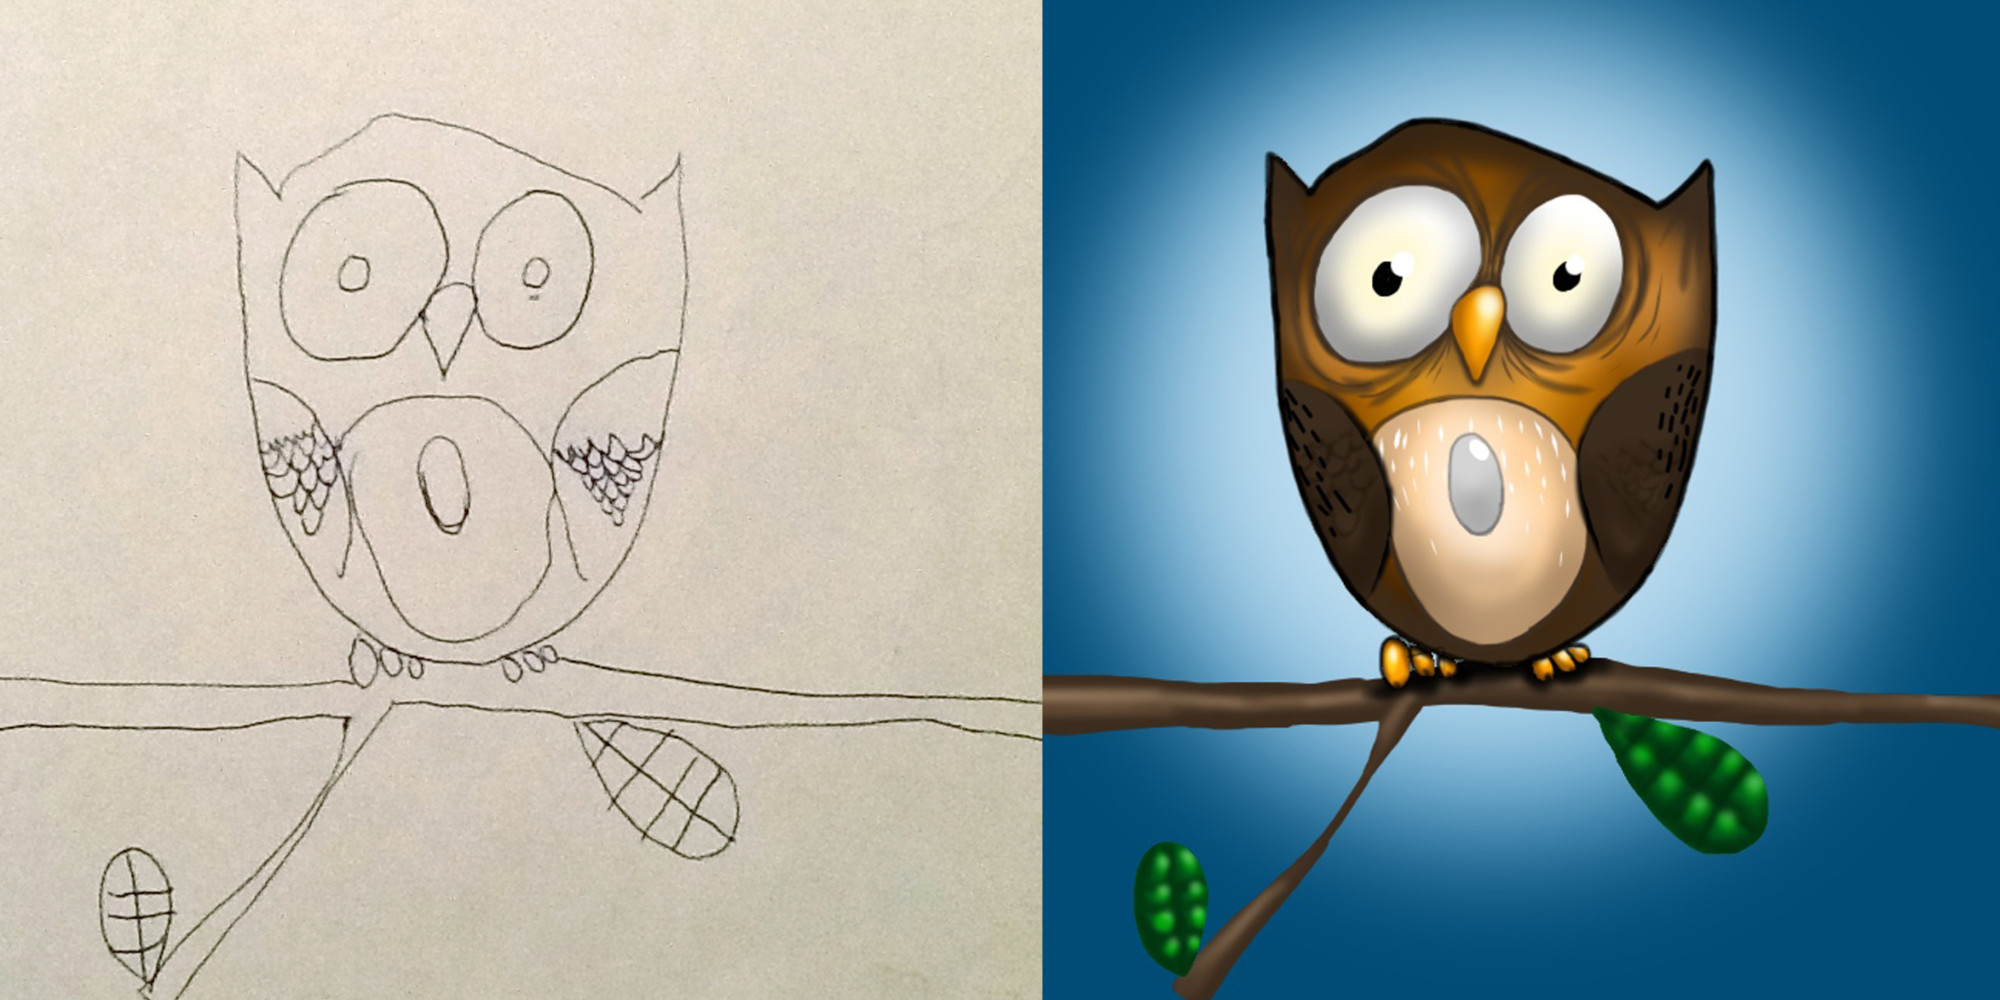 Cartoon Famous Drawings For Kids To Sketch with simple drawing